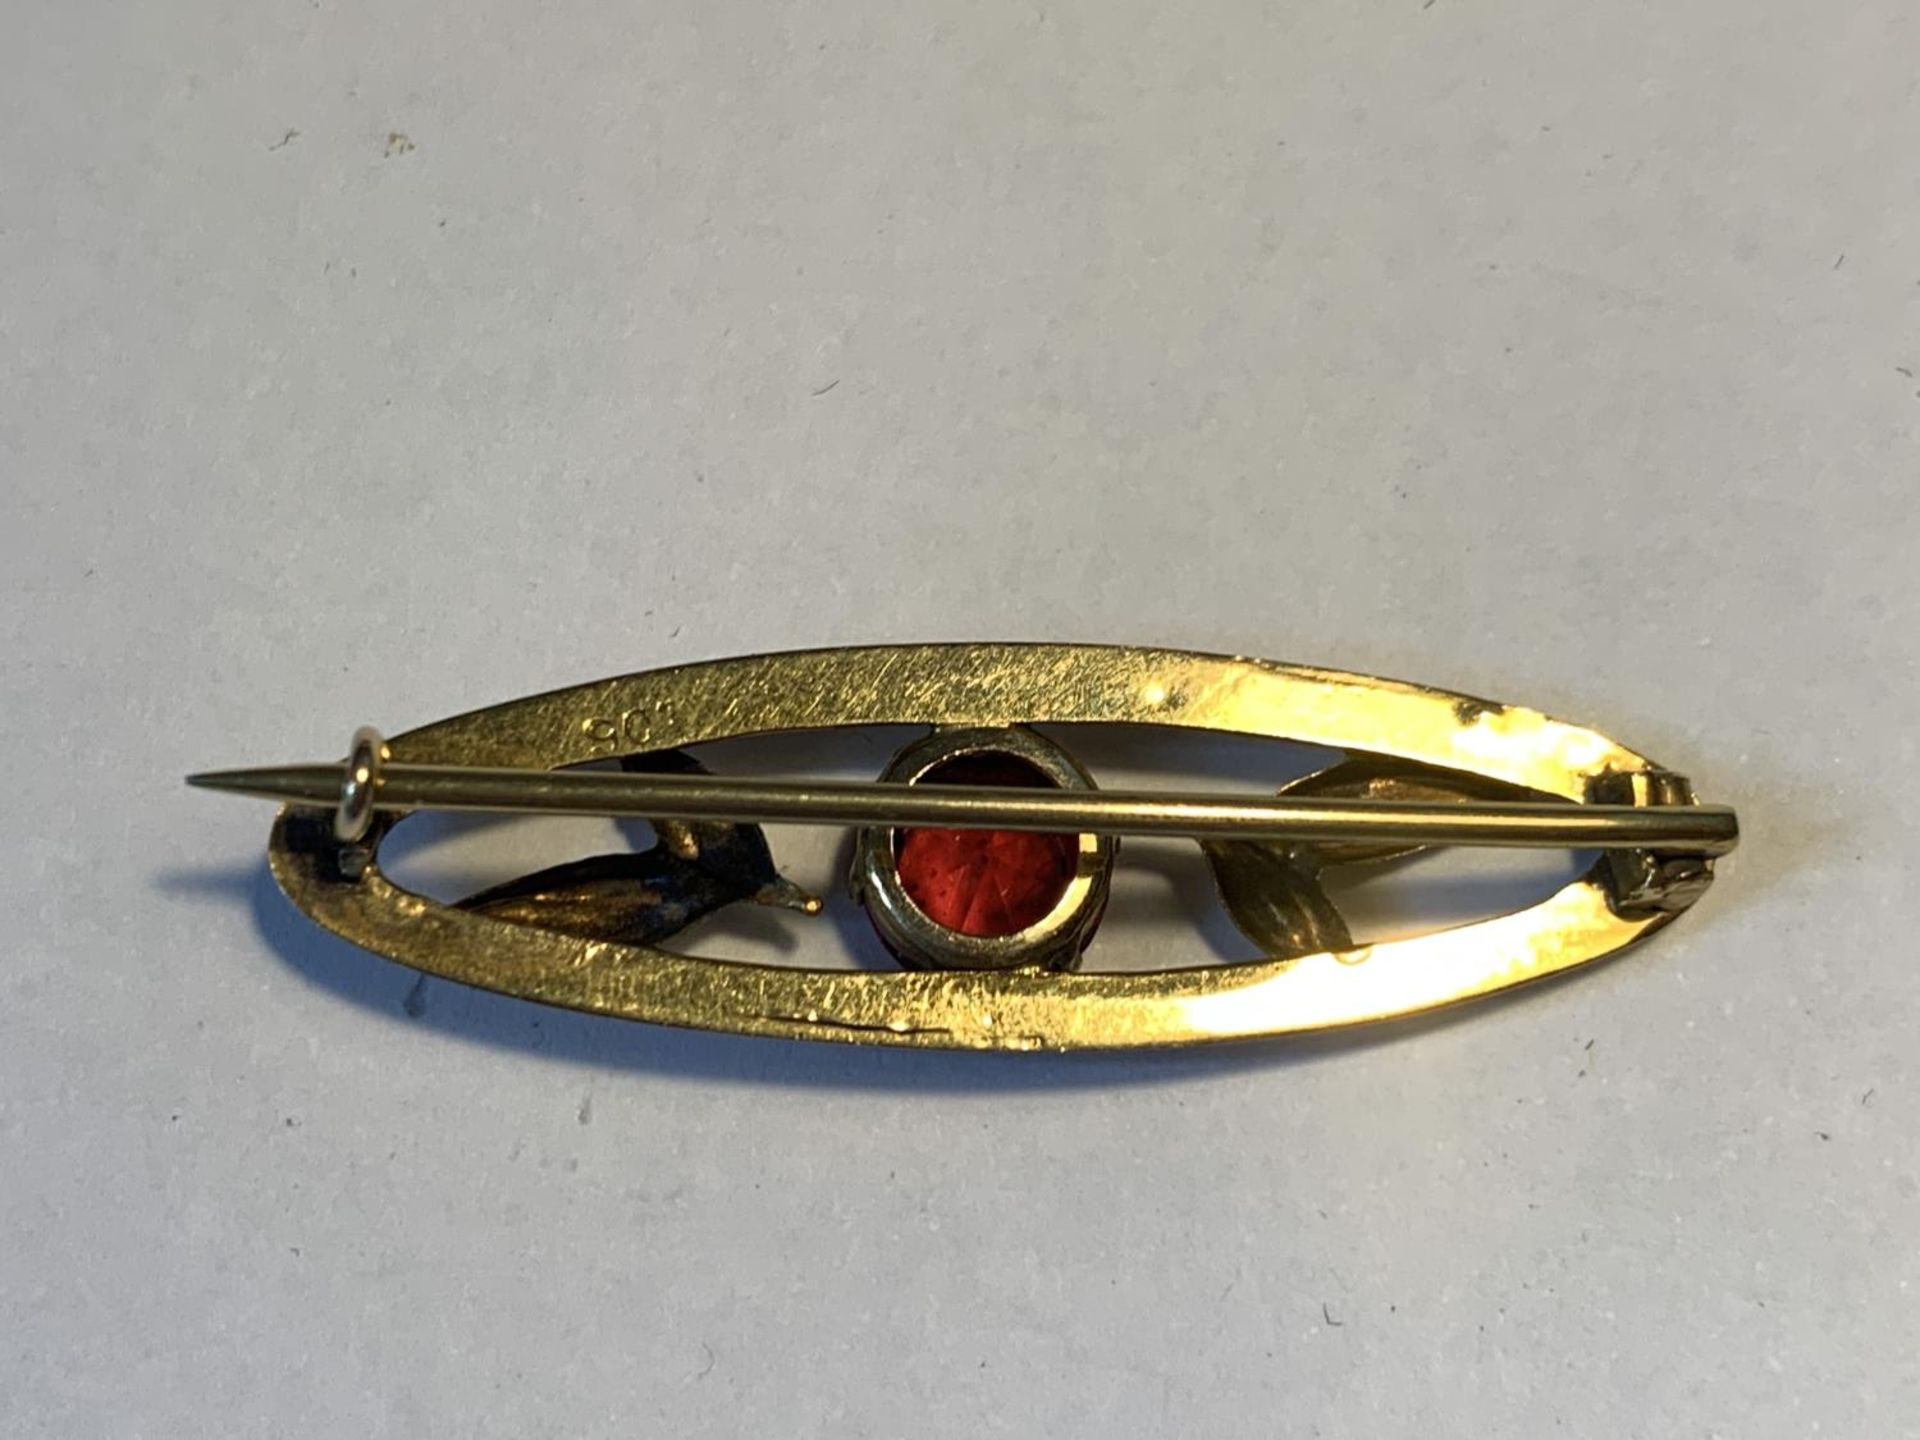 A 9 CARAT GOLD BROOCH WITH CENTRE RED STONE GROSS WEIGHT 2.64 GRAMS IN A PRESENTATION BOX - Image 2 of 4